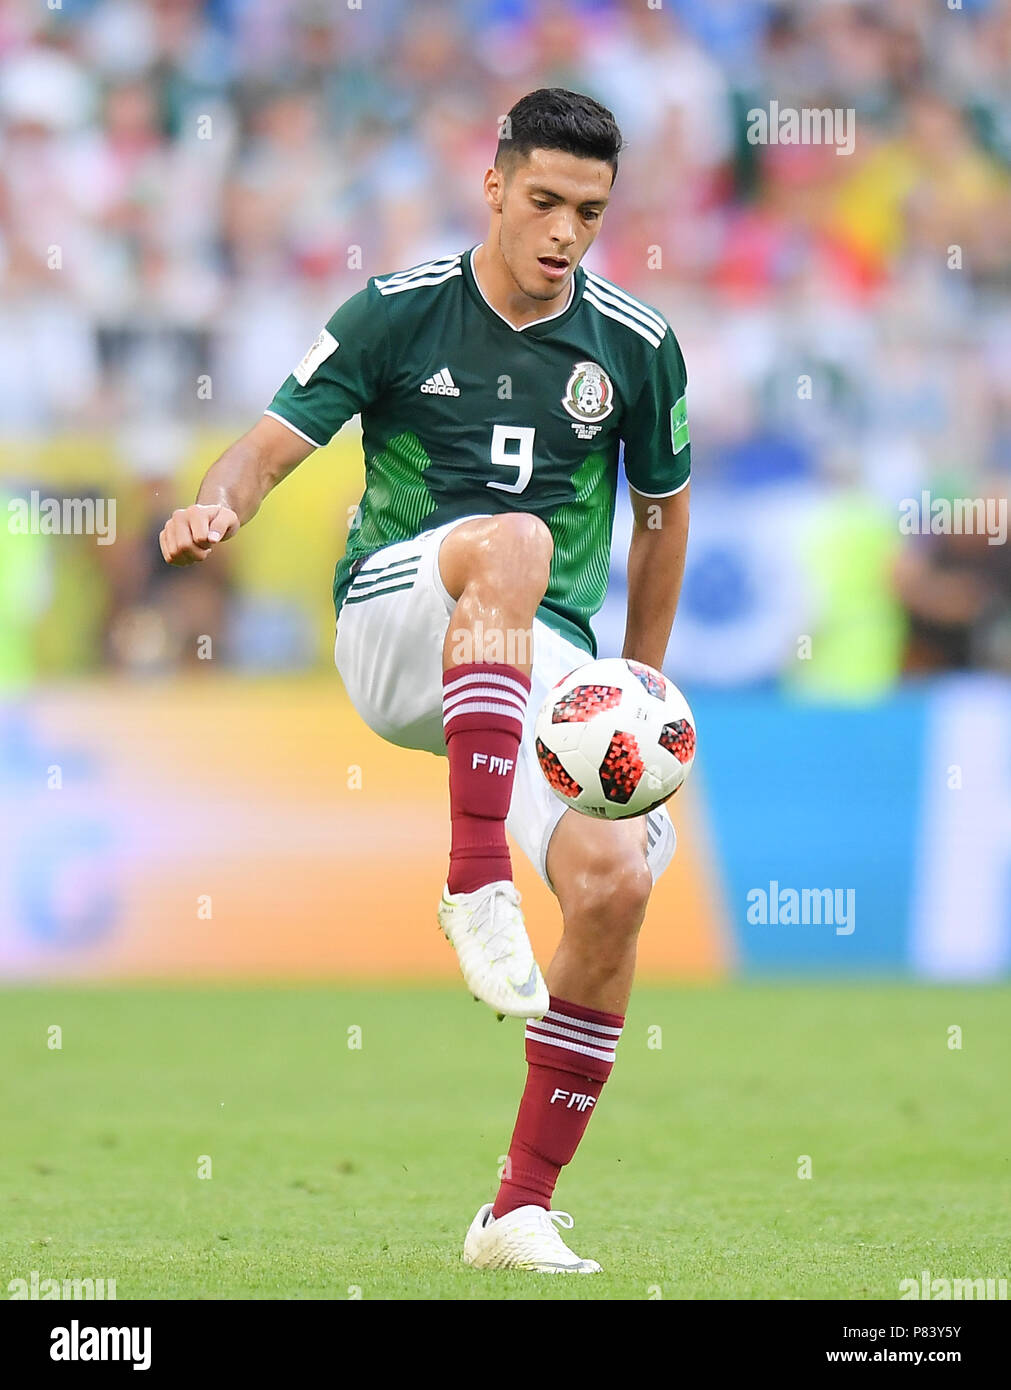 SAMARA, RUSSIA - JULY 02: Raul Jimenez of Mexico in action during the 2018 FIFA World Cup Russia Round of 16 match between Brazil and Mexico at Samara Arena on July 2, 2018 in Samara, Russia. (Photo by Lukasz Laskowski/PressFocus/MB Media) Stock Photo